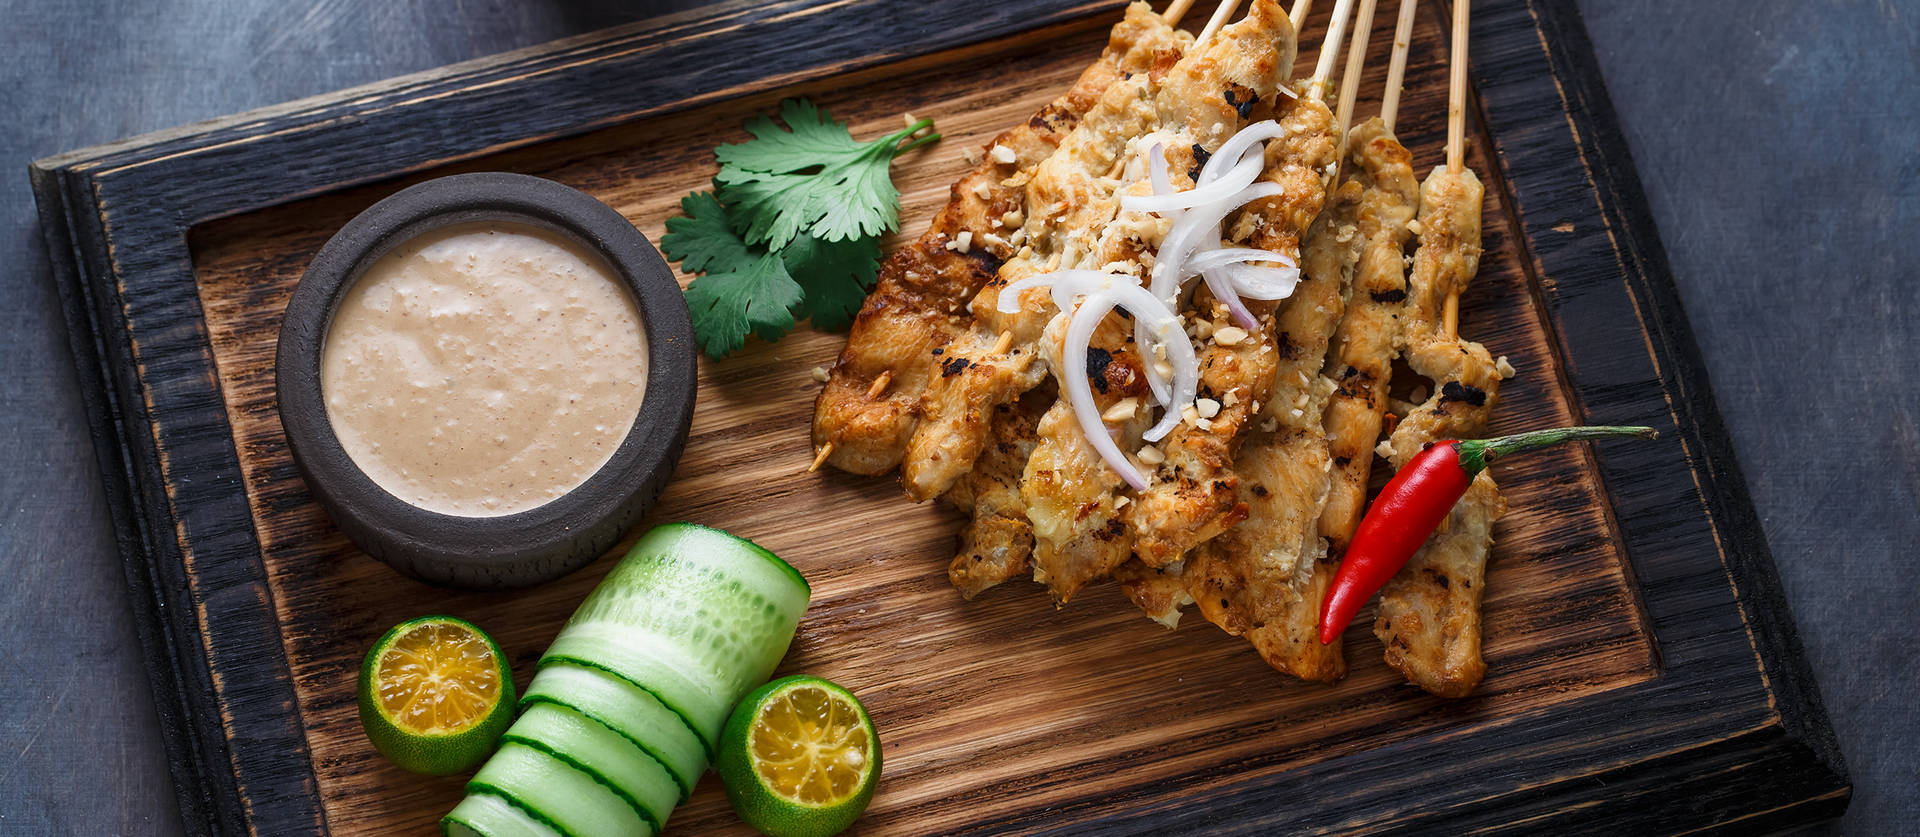 Satay Pictures Wallpaper